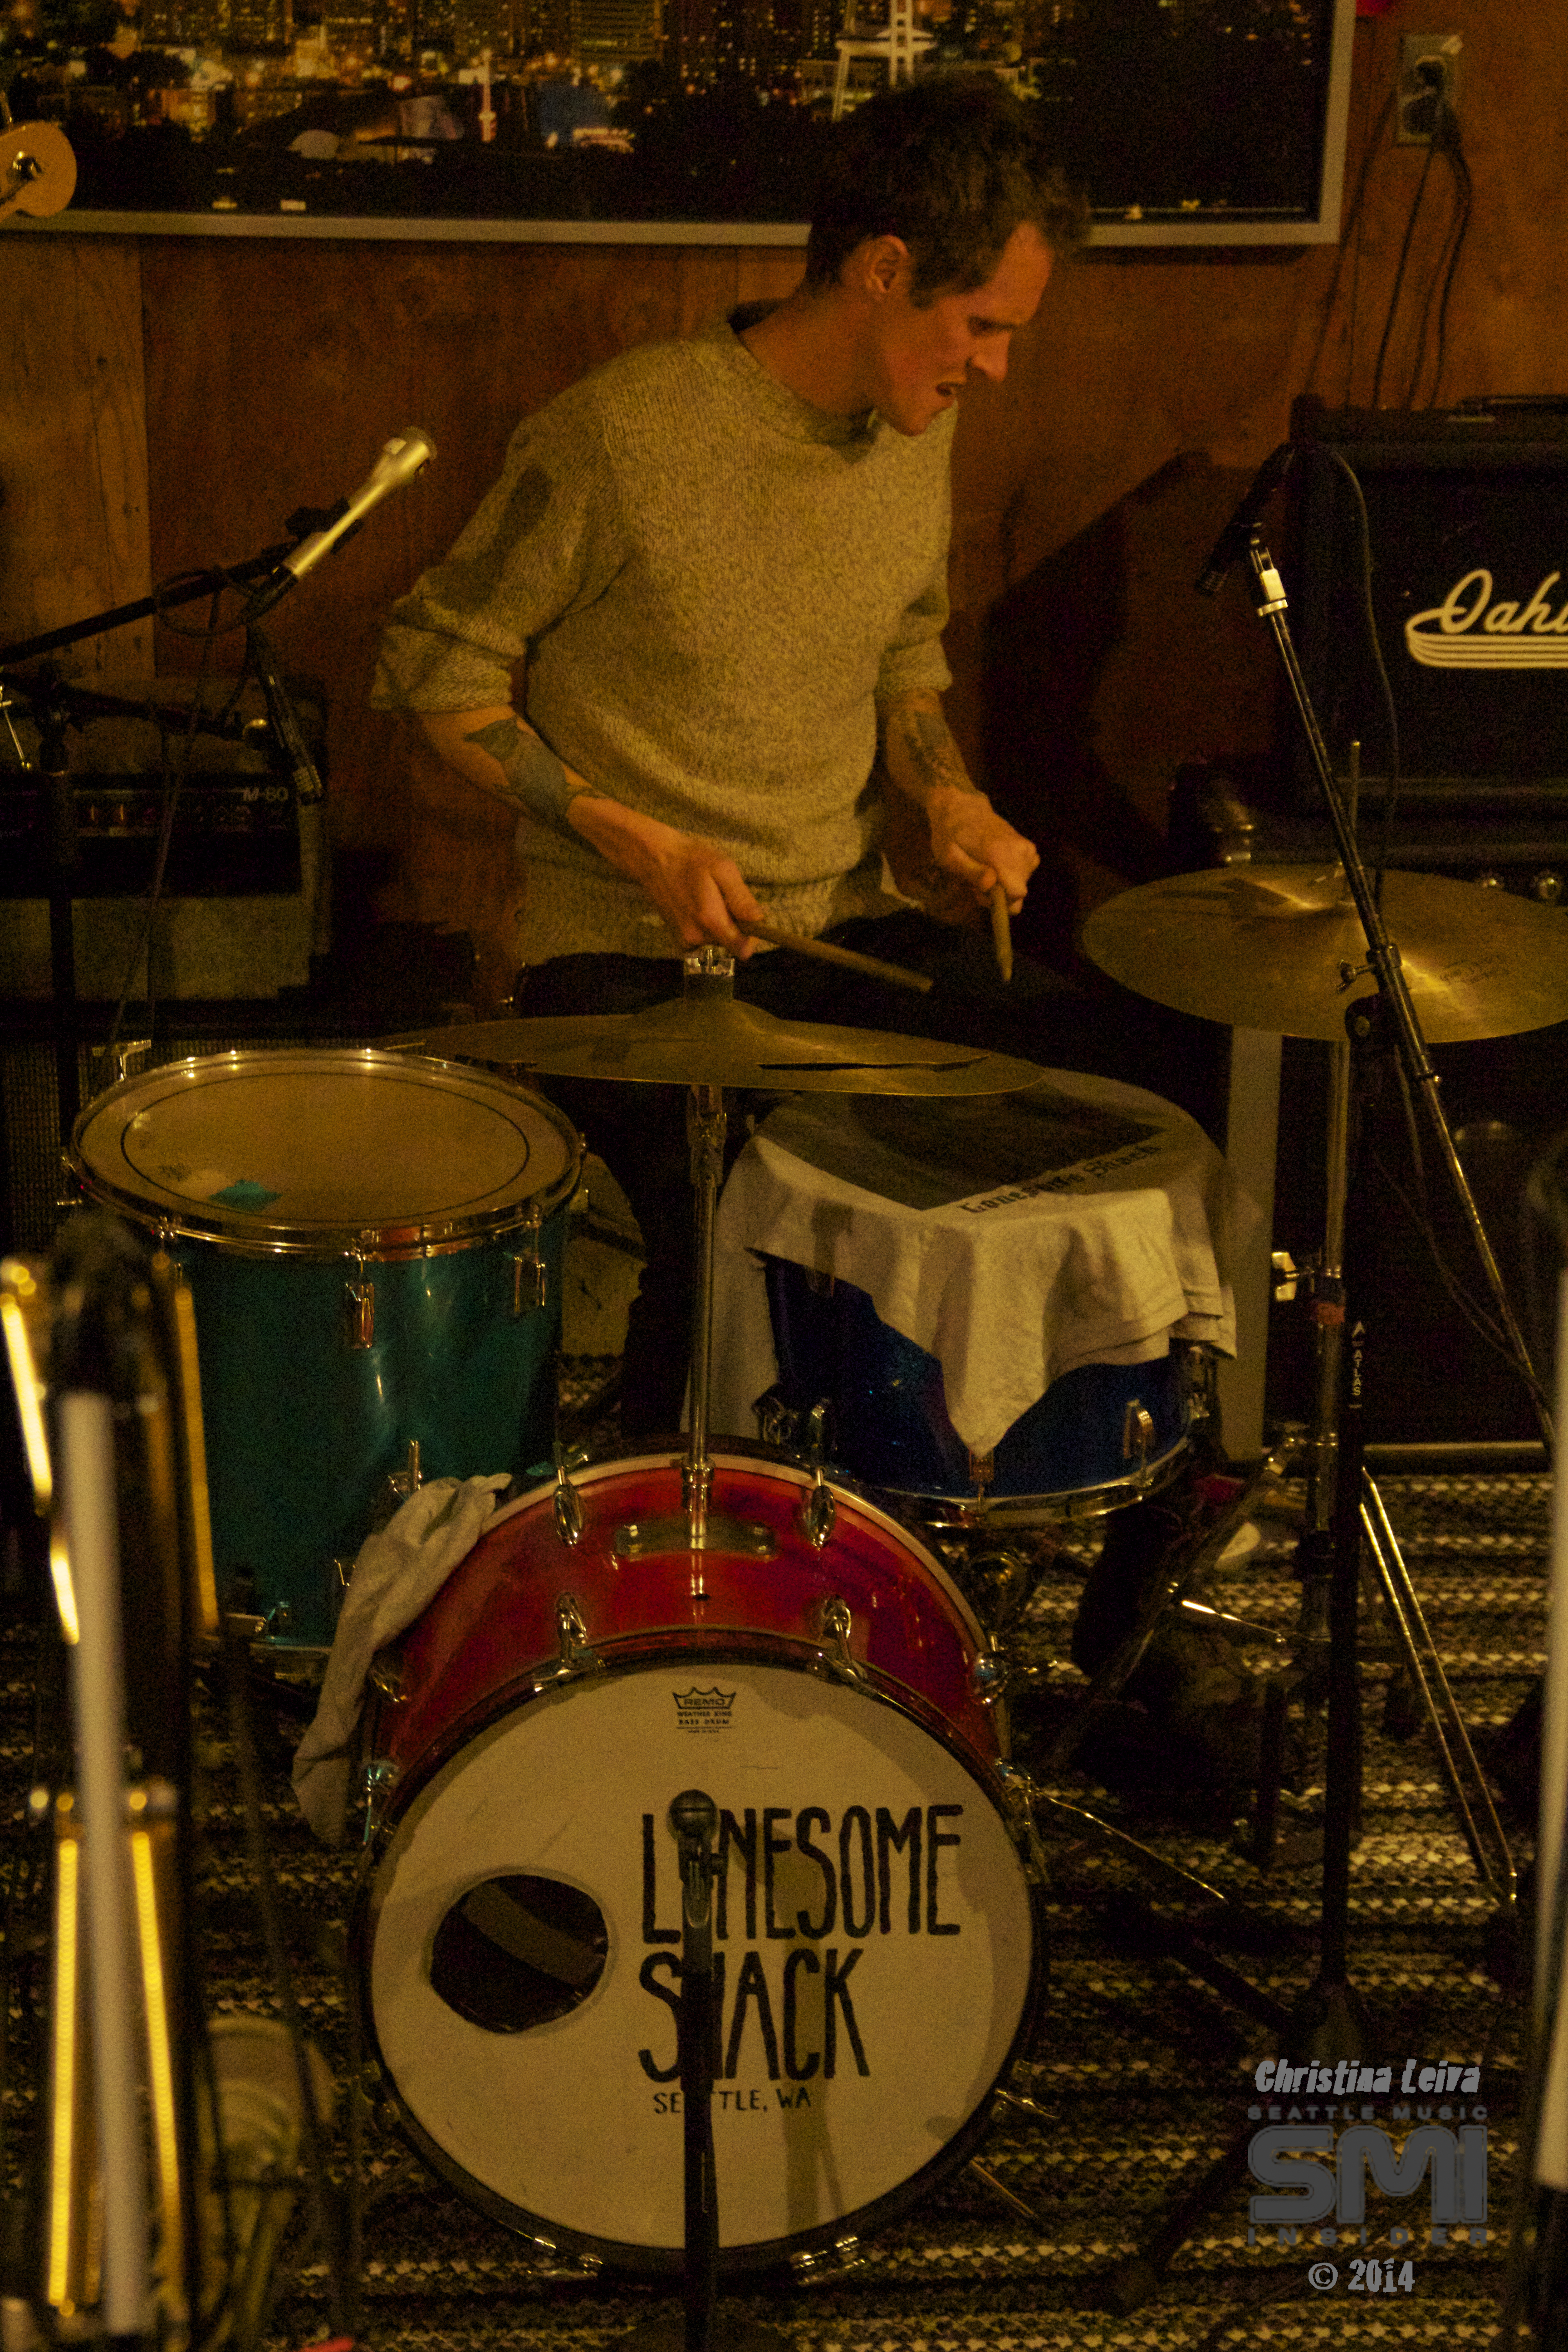 Timber! Shows!: Lonesome Shack (Photo by Christina Leiva)